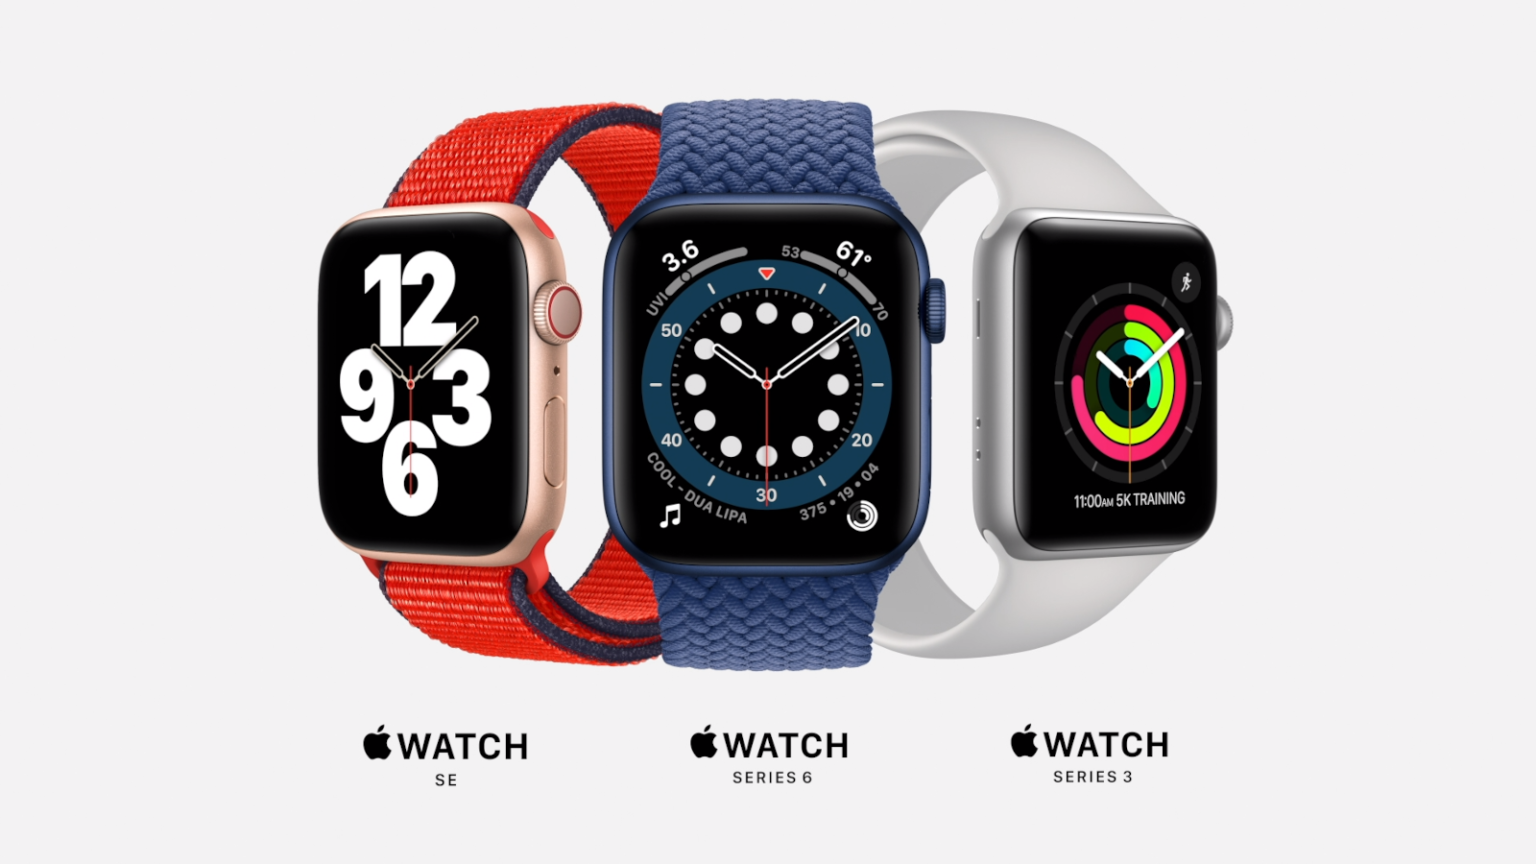 Which Apple Watch Should You Buy Among Series 6, Series 3, and the SE? - TechNadu